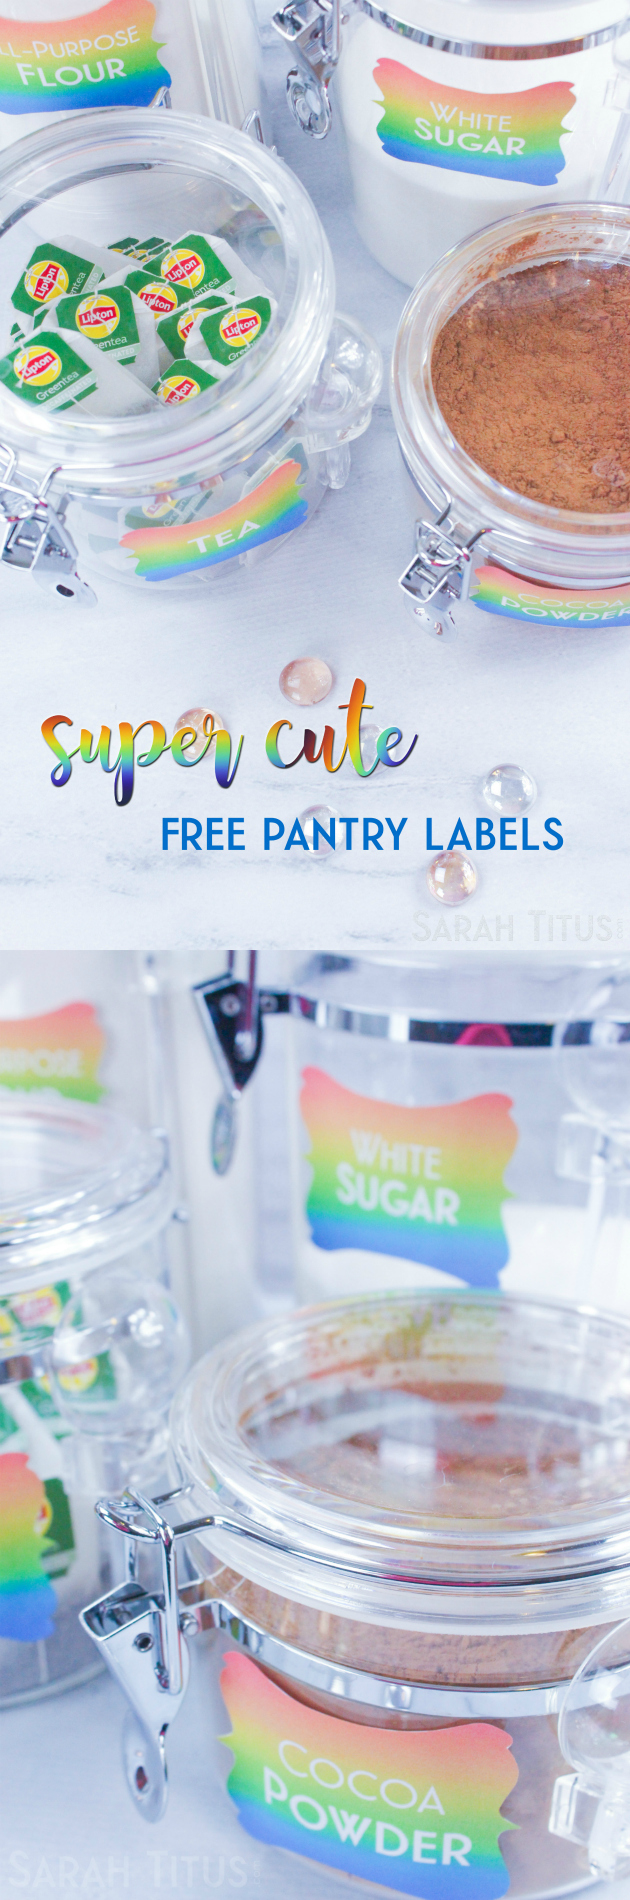 Is it just me or are all the free pantry labels dull and boring? Give your canisters some LIFE and pizzazz with these super CUTE, colorful free printable pantry labels!